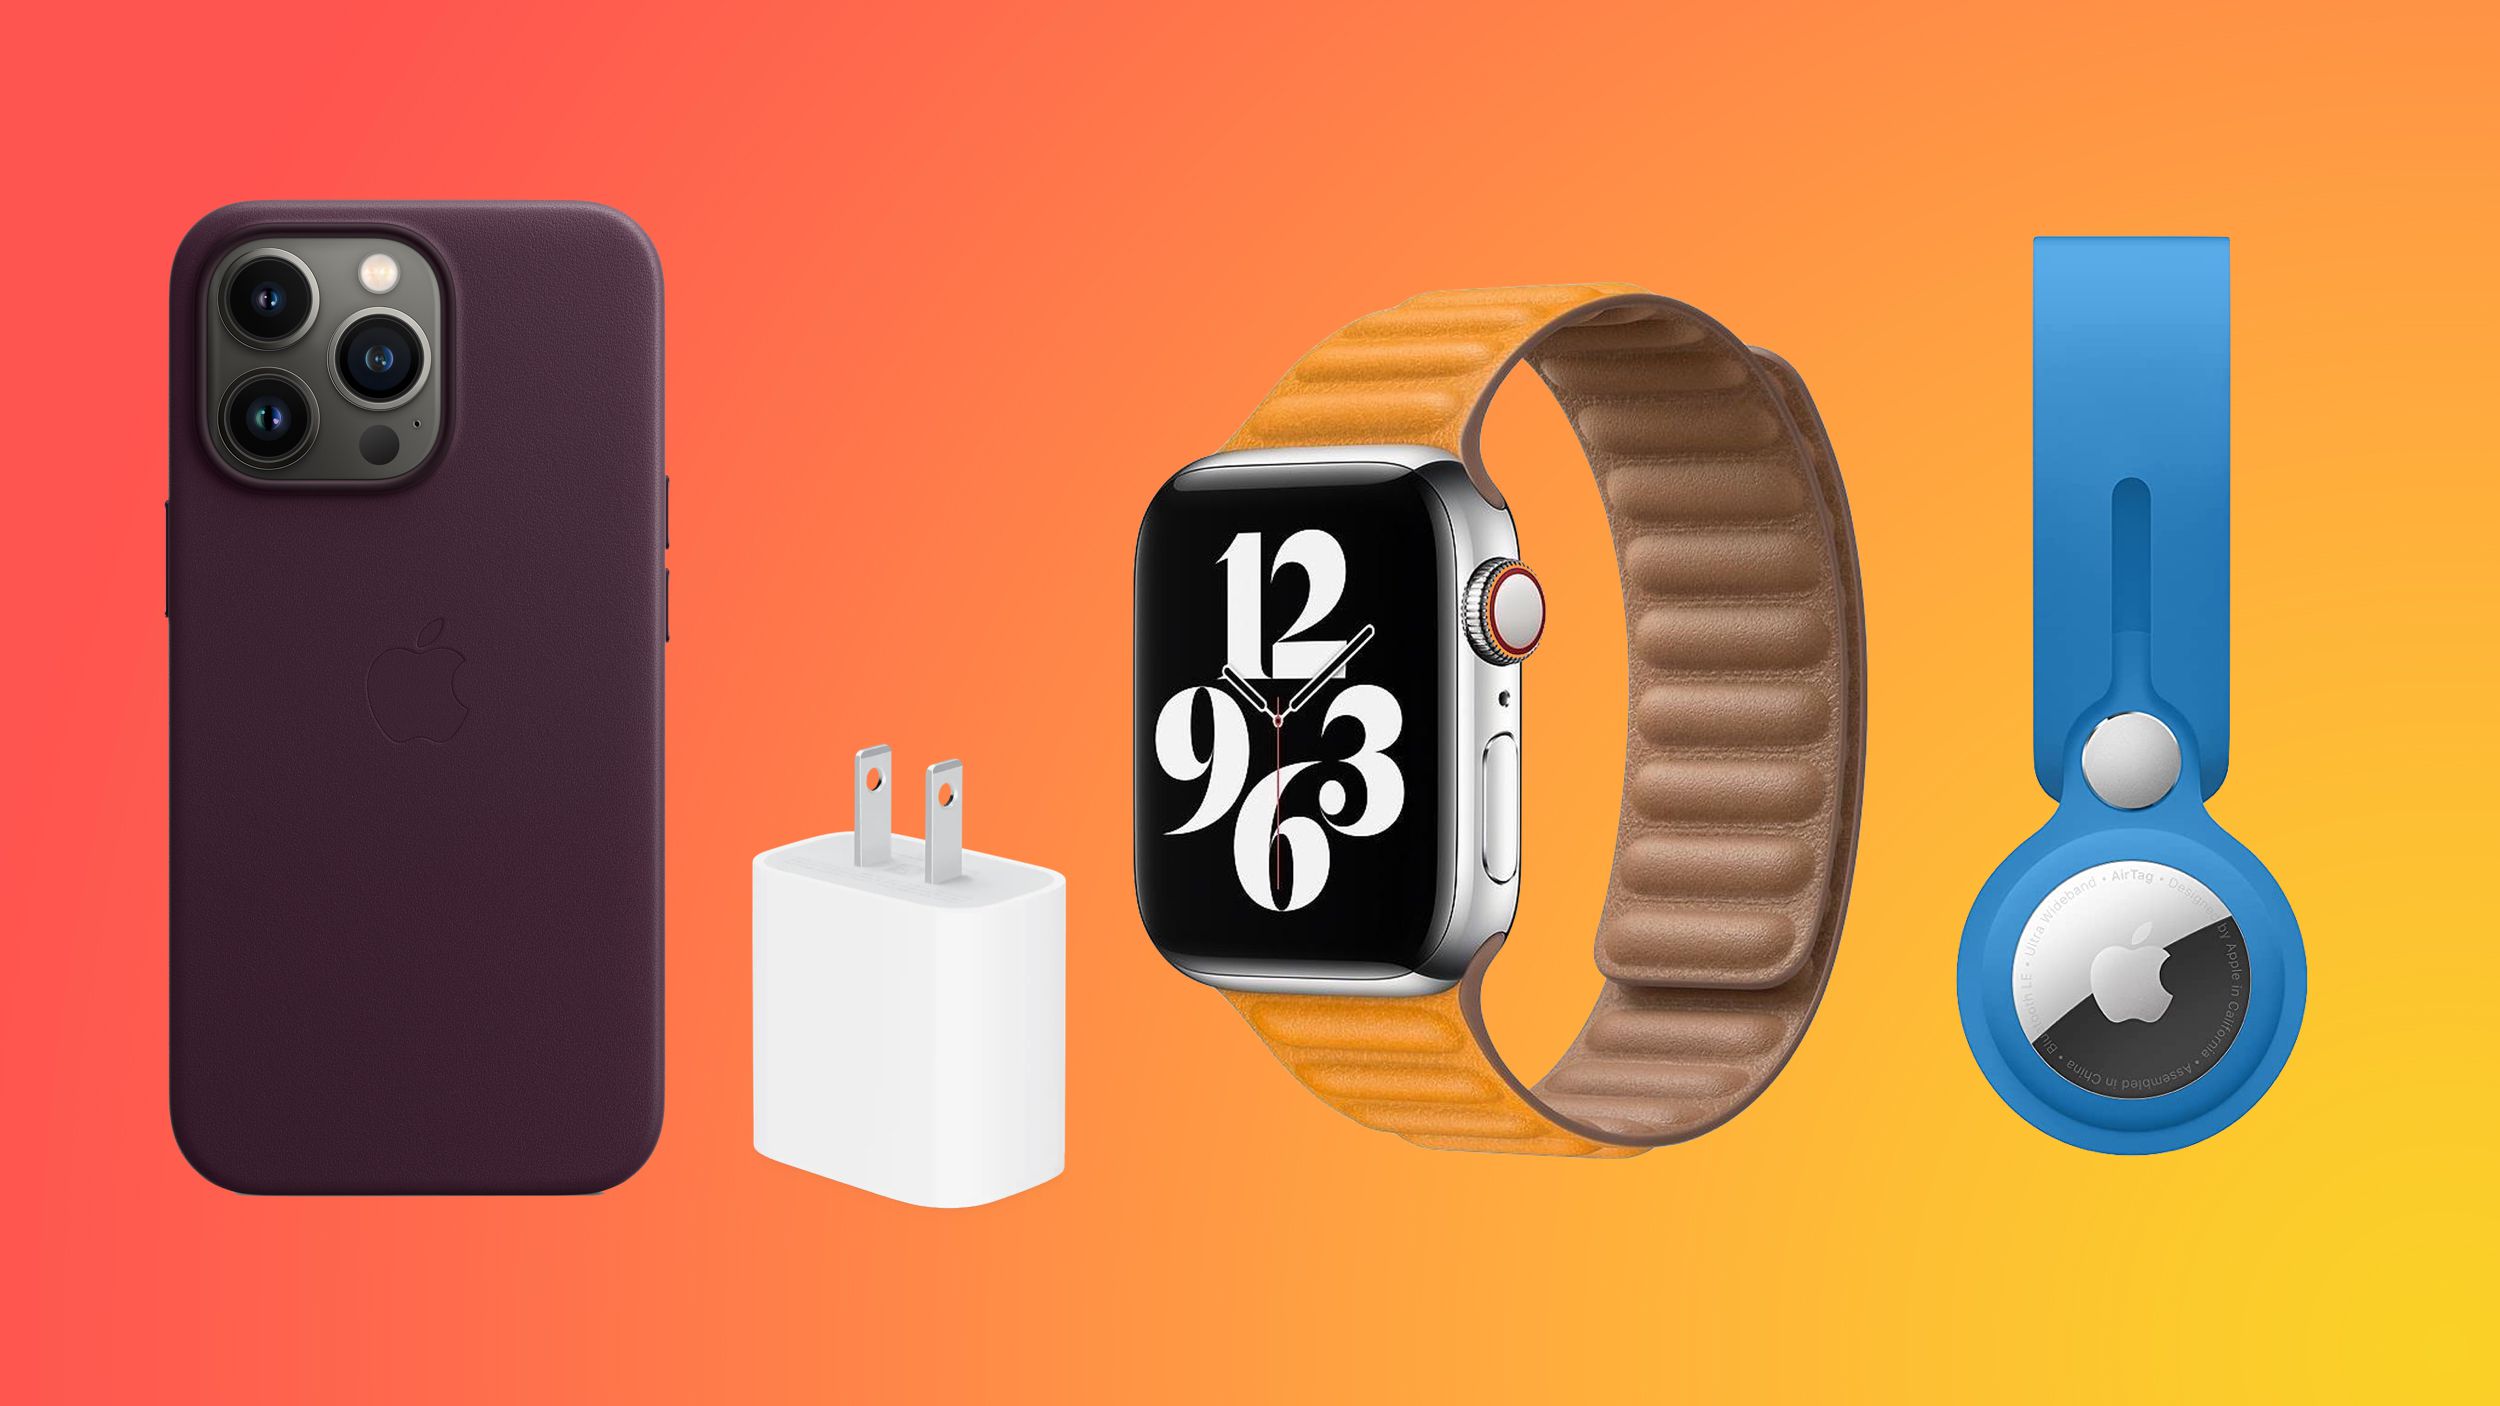 Deals: Woot's New Sale Has Steep Discounts on Apple Watch Bands, AirTag Keychains, and More Apple Accessories - macrumors.com